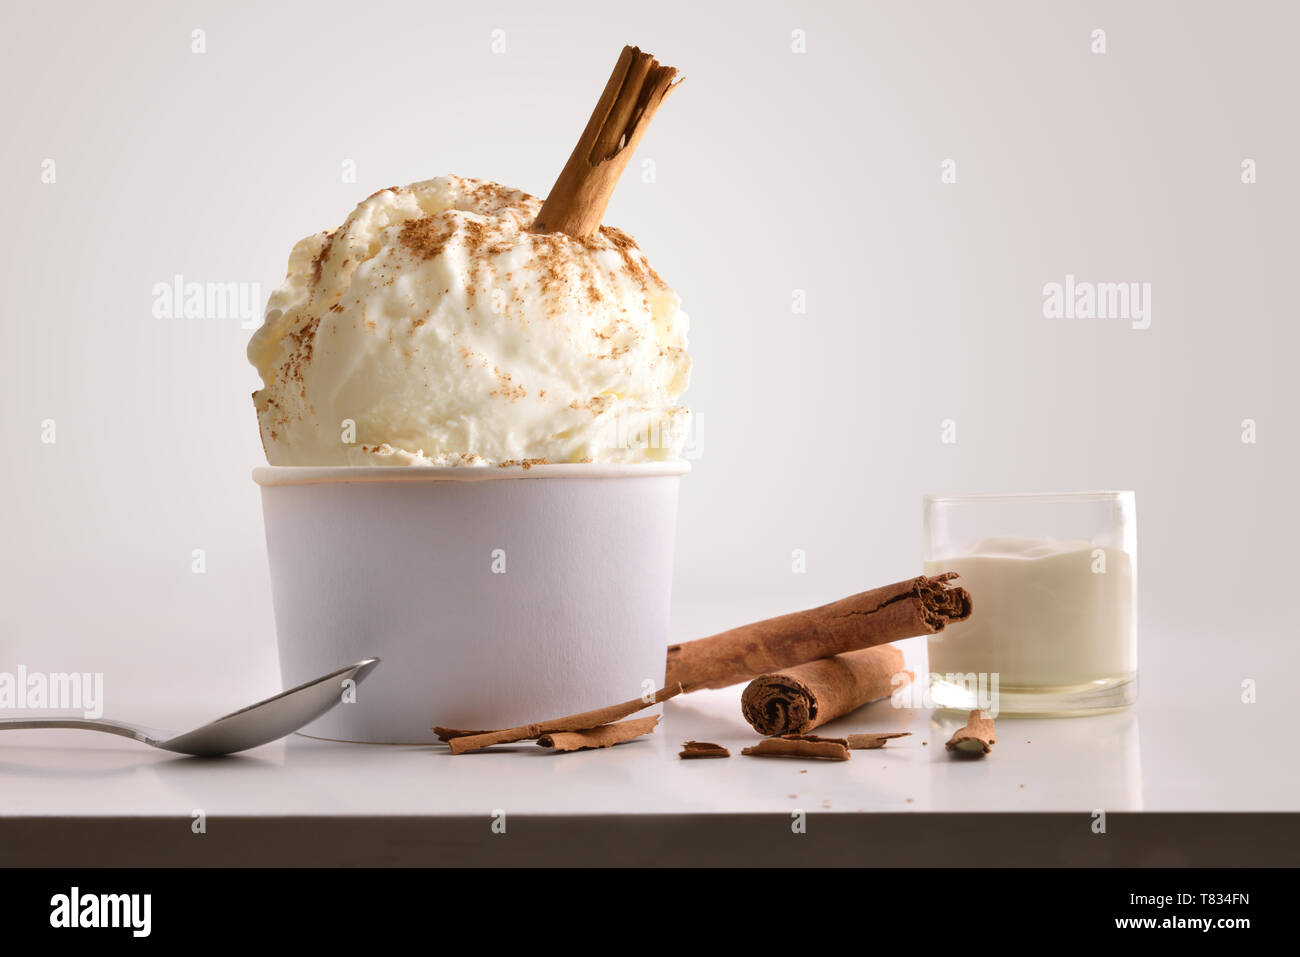 Composition of cinnamon ice cream ball in paper cup on white table with products of ornament and elaboration isolated background. Horizontal compositi Stock Photo